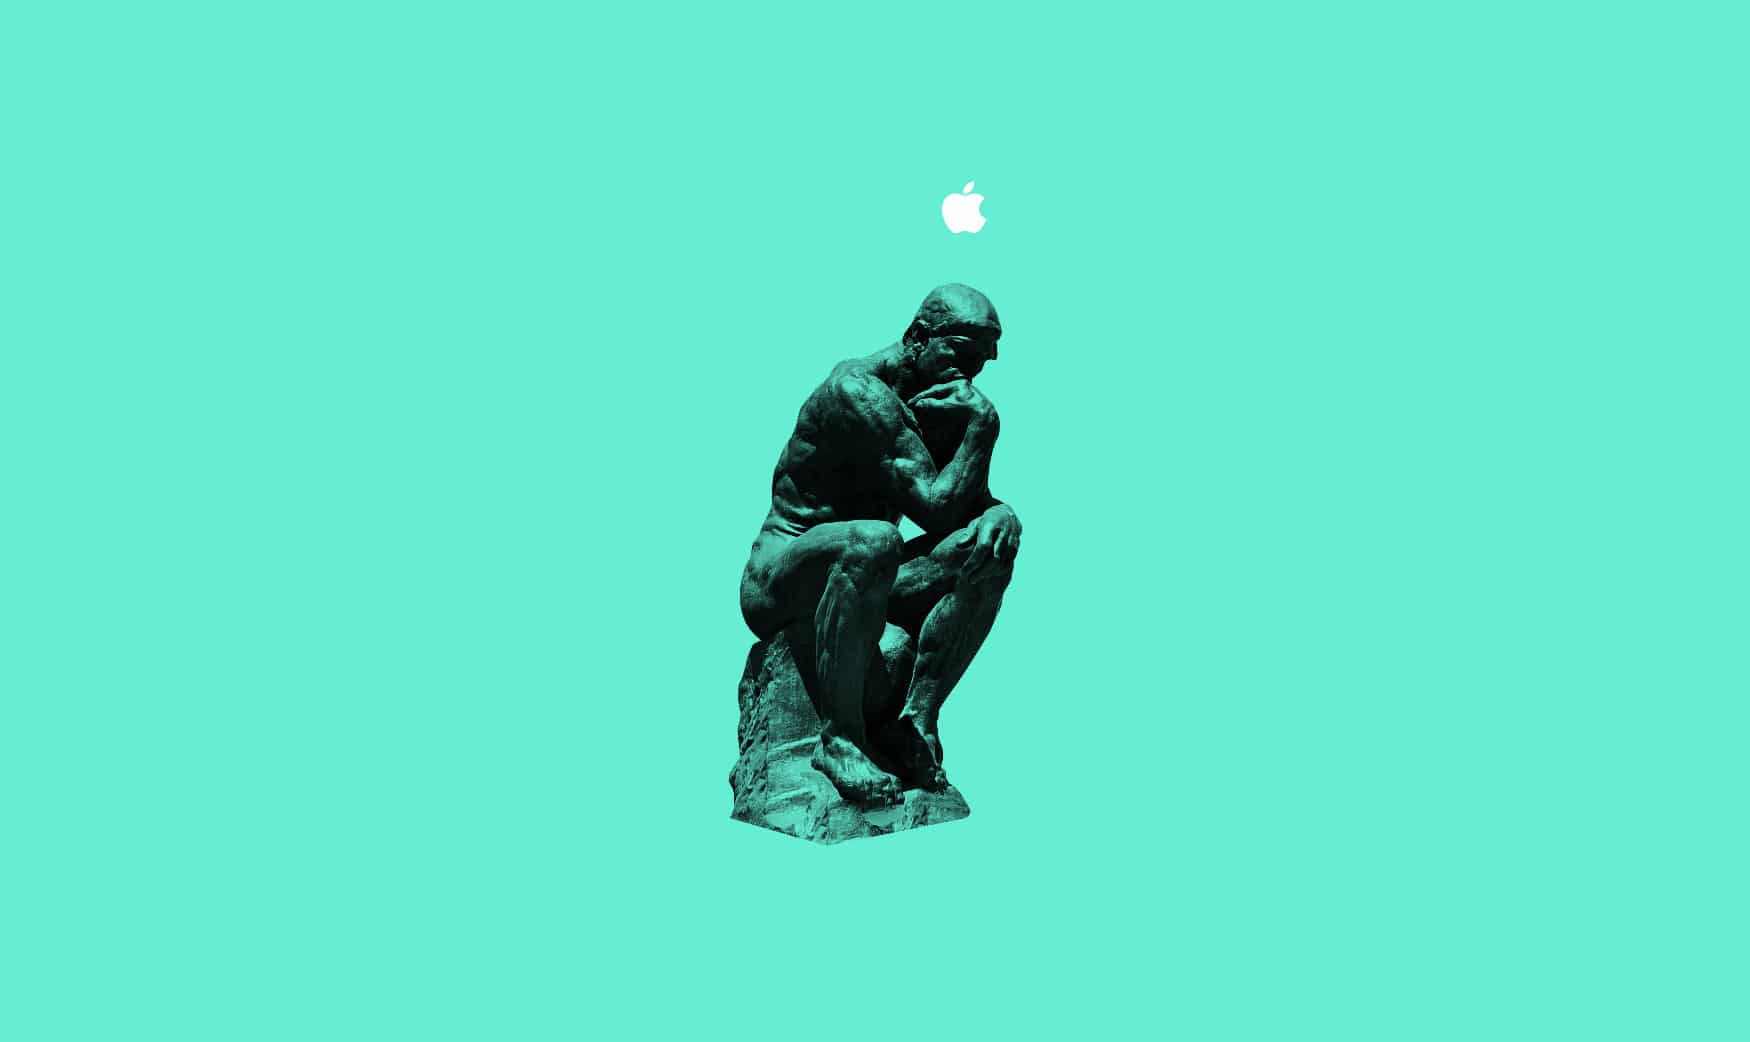 5 lessons on branding we can learn from Apple